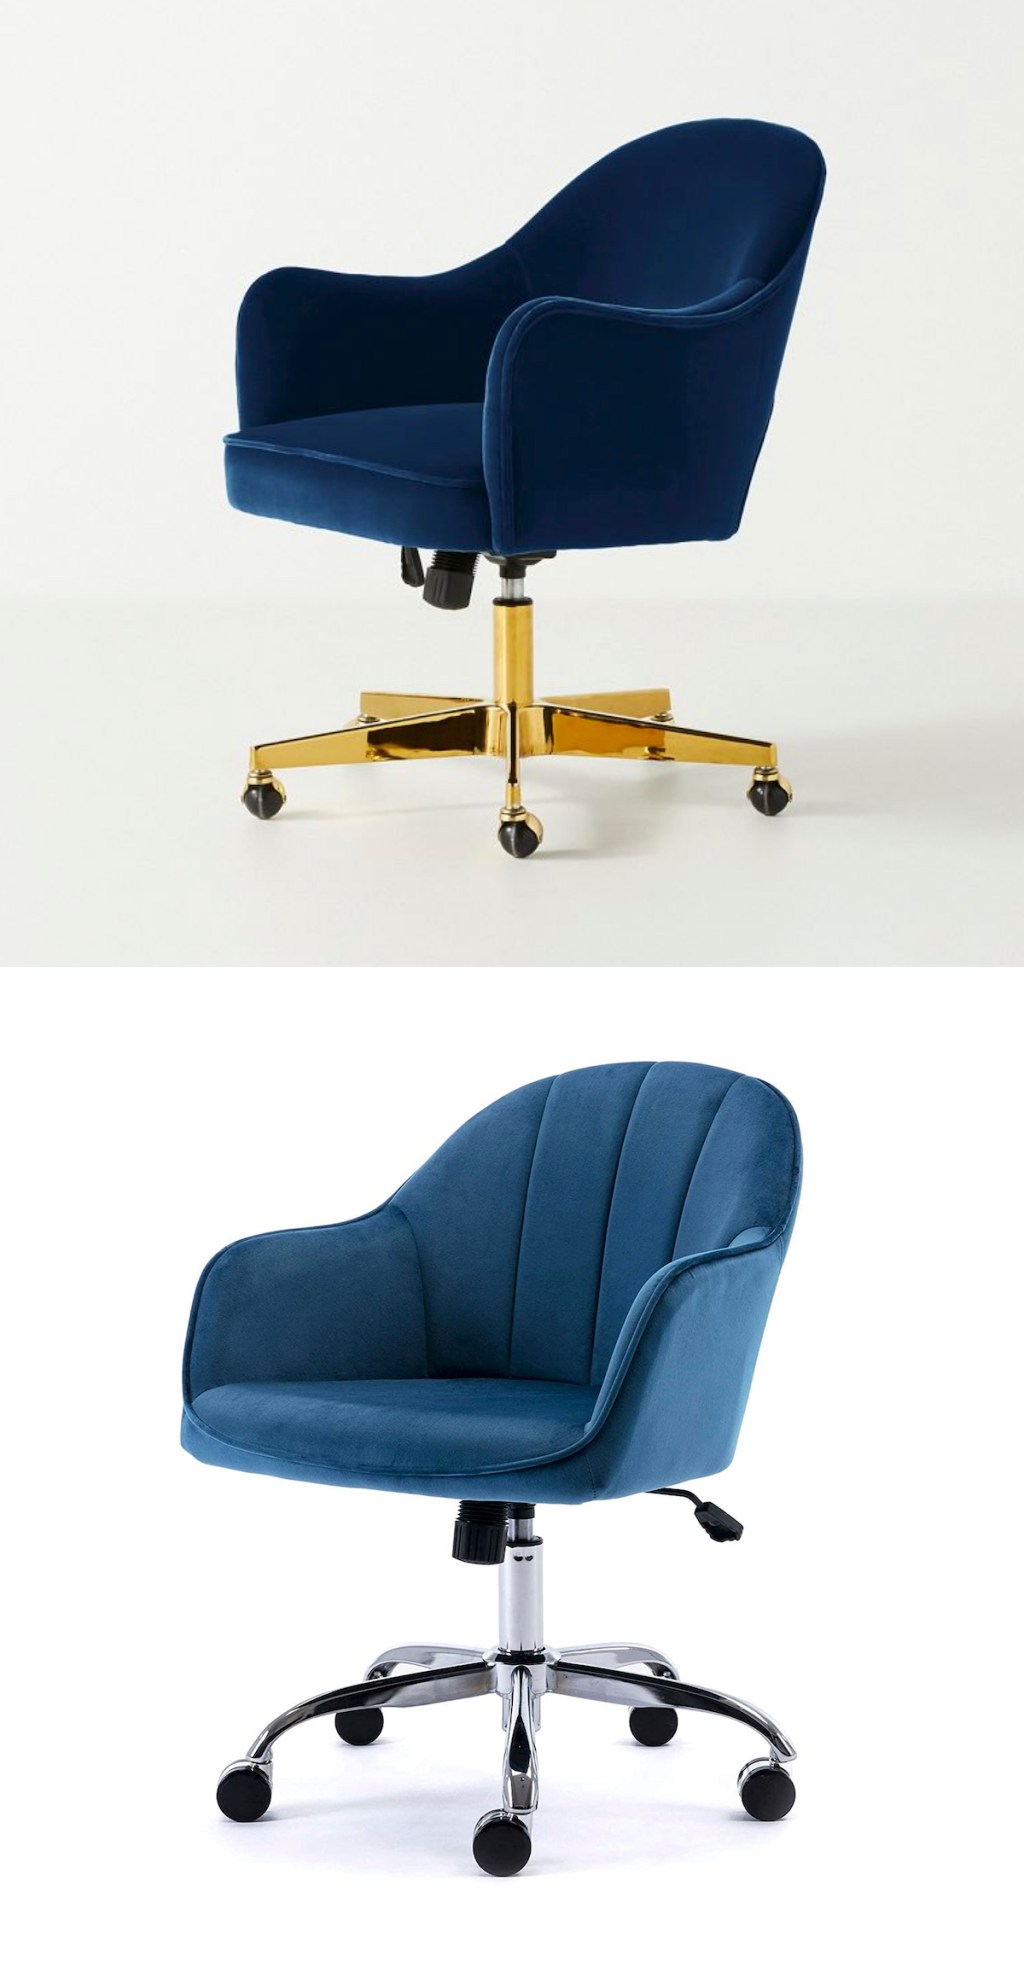 two dark blue desk chairs on white backgrounds